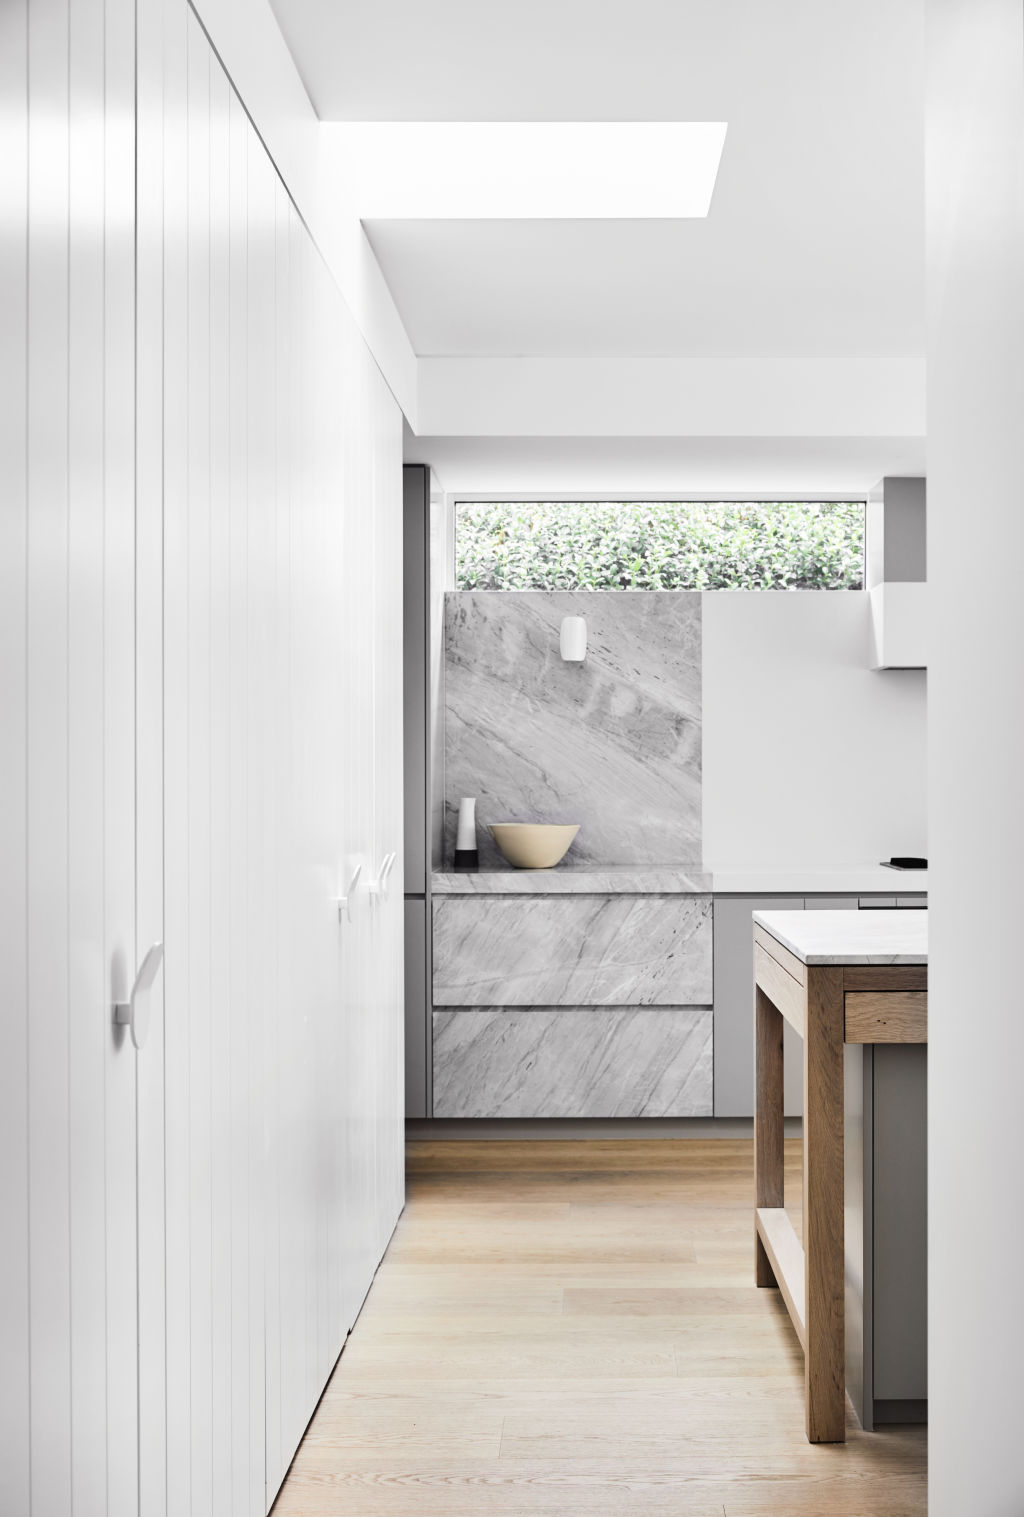 Marble and timber add a touch of luxe to the kitchen. Photo: Sharyn Cairns